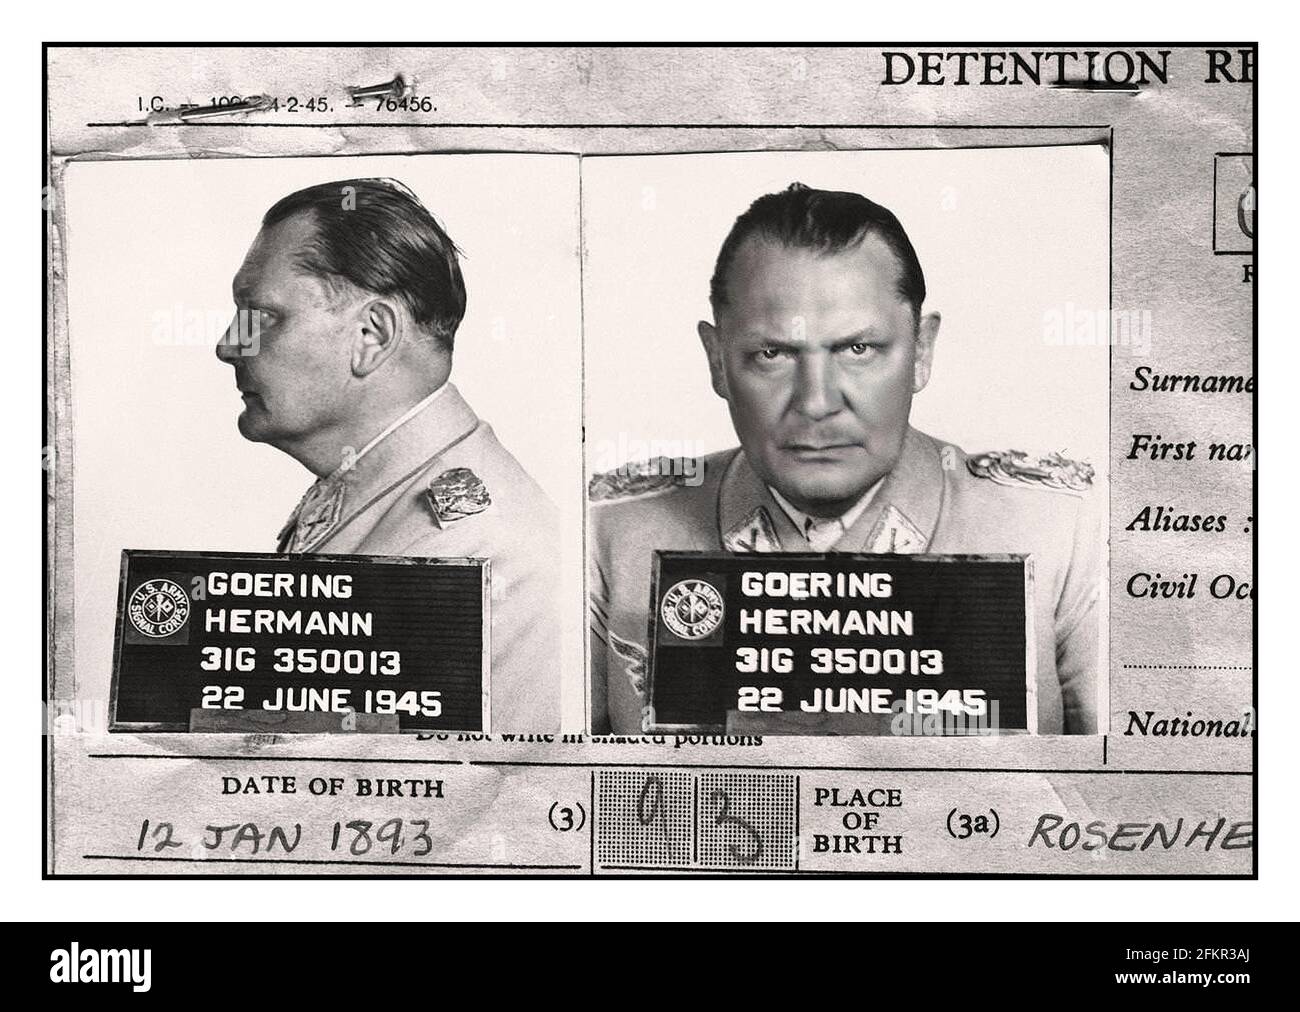 1945 Hermann Goering capture Prisoner Head shots of leading Nazi Hermann Goering from his detention report at Nuremberg Trials Germany Date 22 June 1945 Hermann Wilhelm Göring was a German political and military leader and a convicted war criminal. He was one of the most powerful figures in the Nazi Party, which ruled Germany from 1933 to 1945. A veteran World War I fighter pilot ace, he was a recipient of the Pour le Mérite cross for bravery Stock Photo